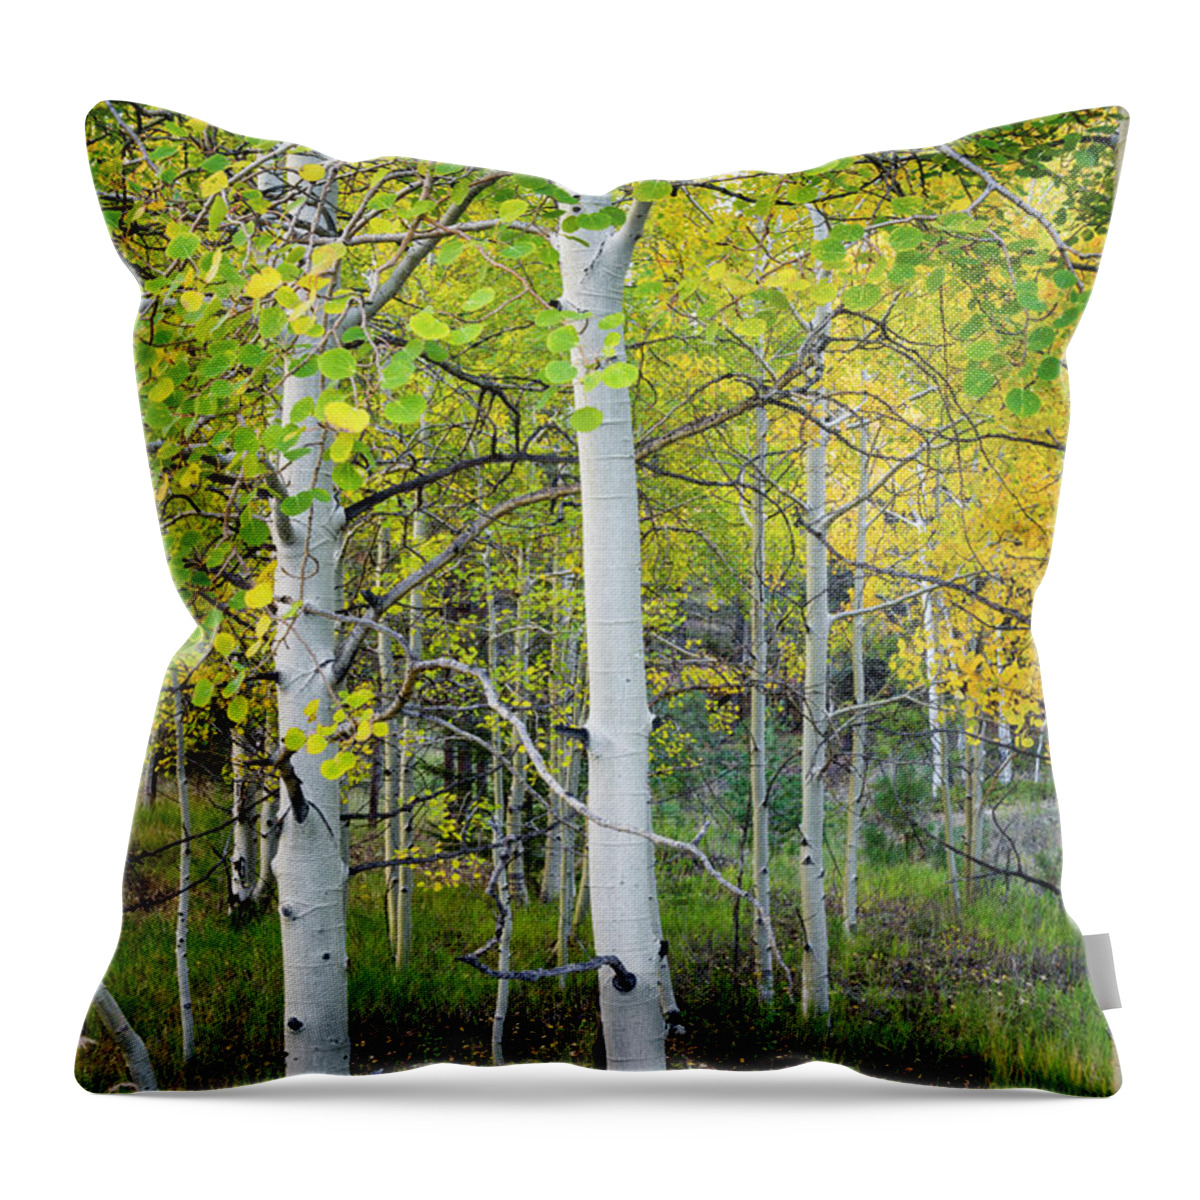 Aspen Throw Pillow featuring the photograph Aspens In Autumn 6 - Santa Fe National Forest New Mexico by Brian Harig